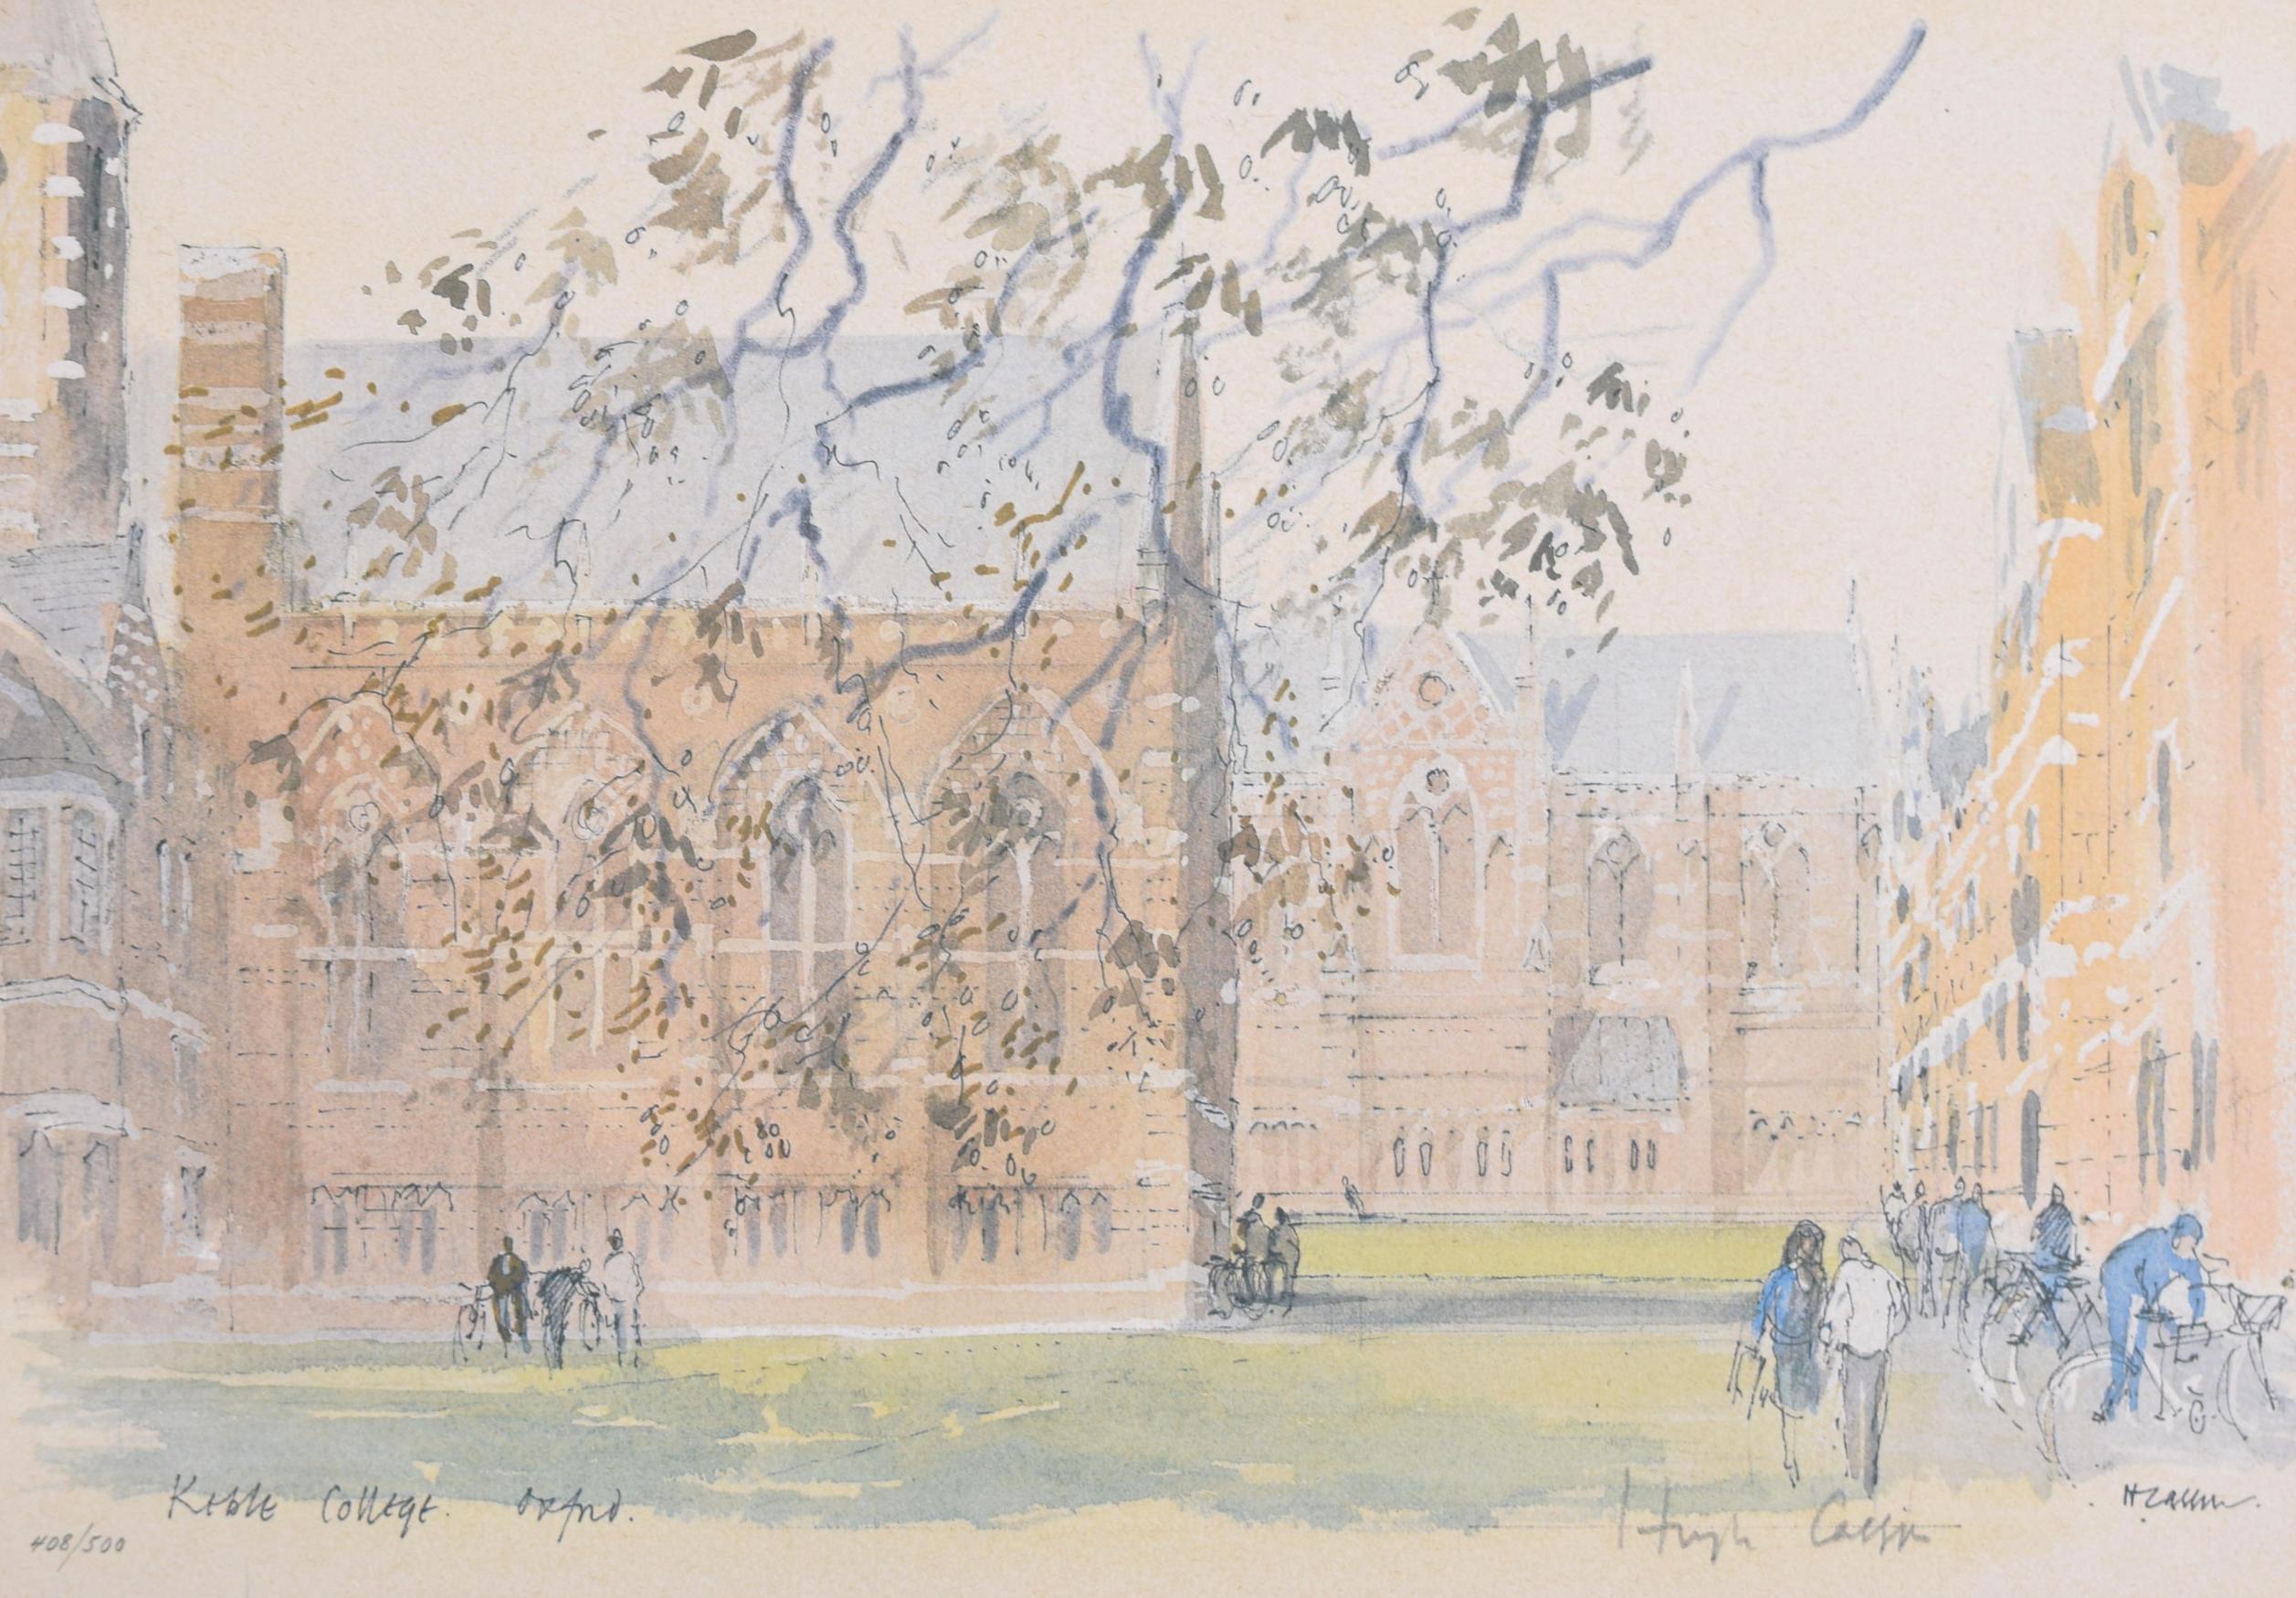 To see our other views of Oxford and Cambridge, scroll down to "More from this Seller" and below it click on "See all from this seller" - or send us a message if you cannot find the view you want.

Hugh Casson (1910 - 1999)
Keble College,